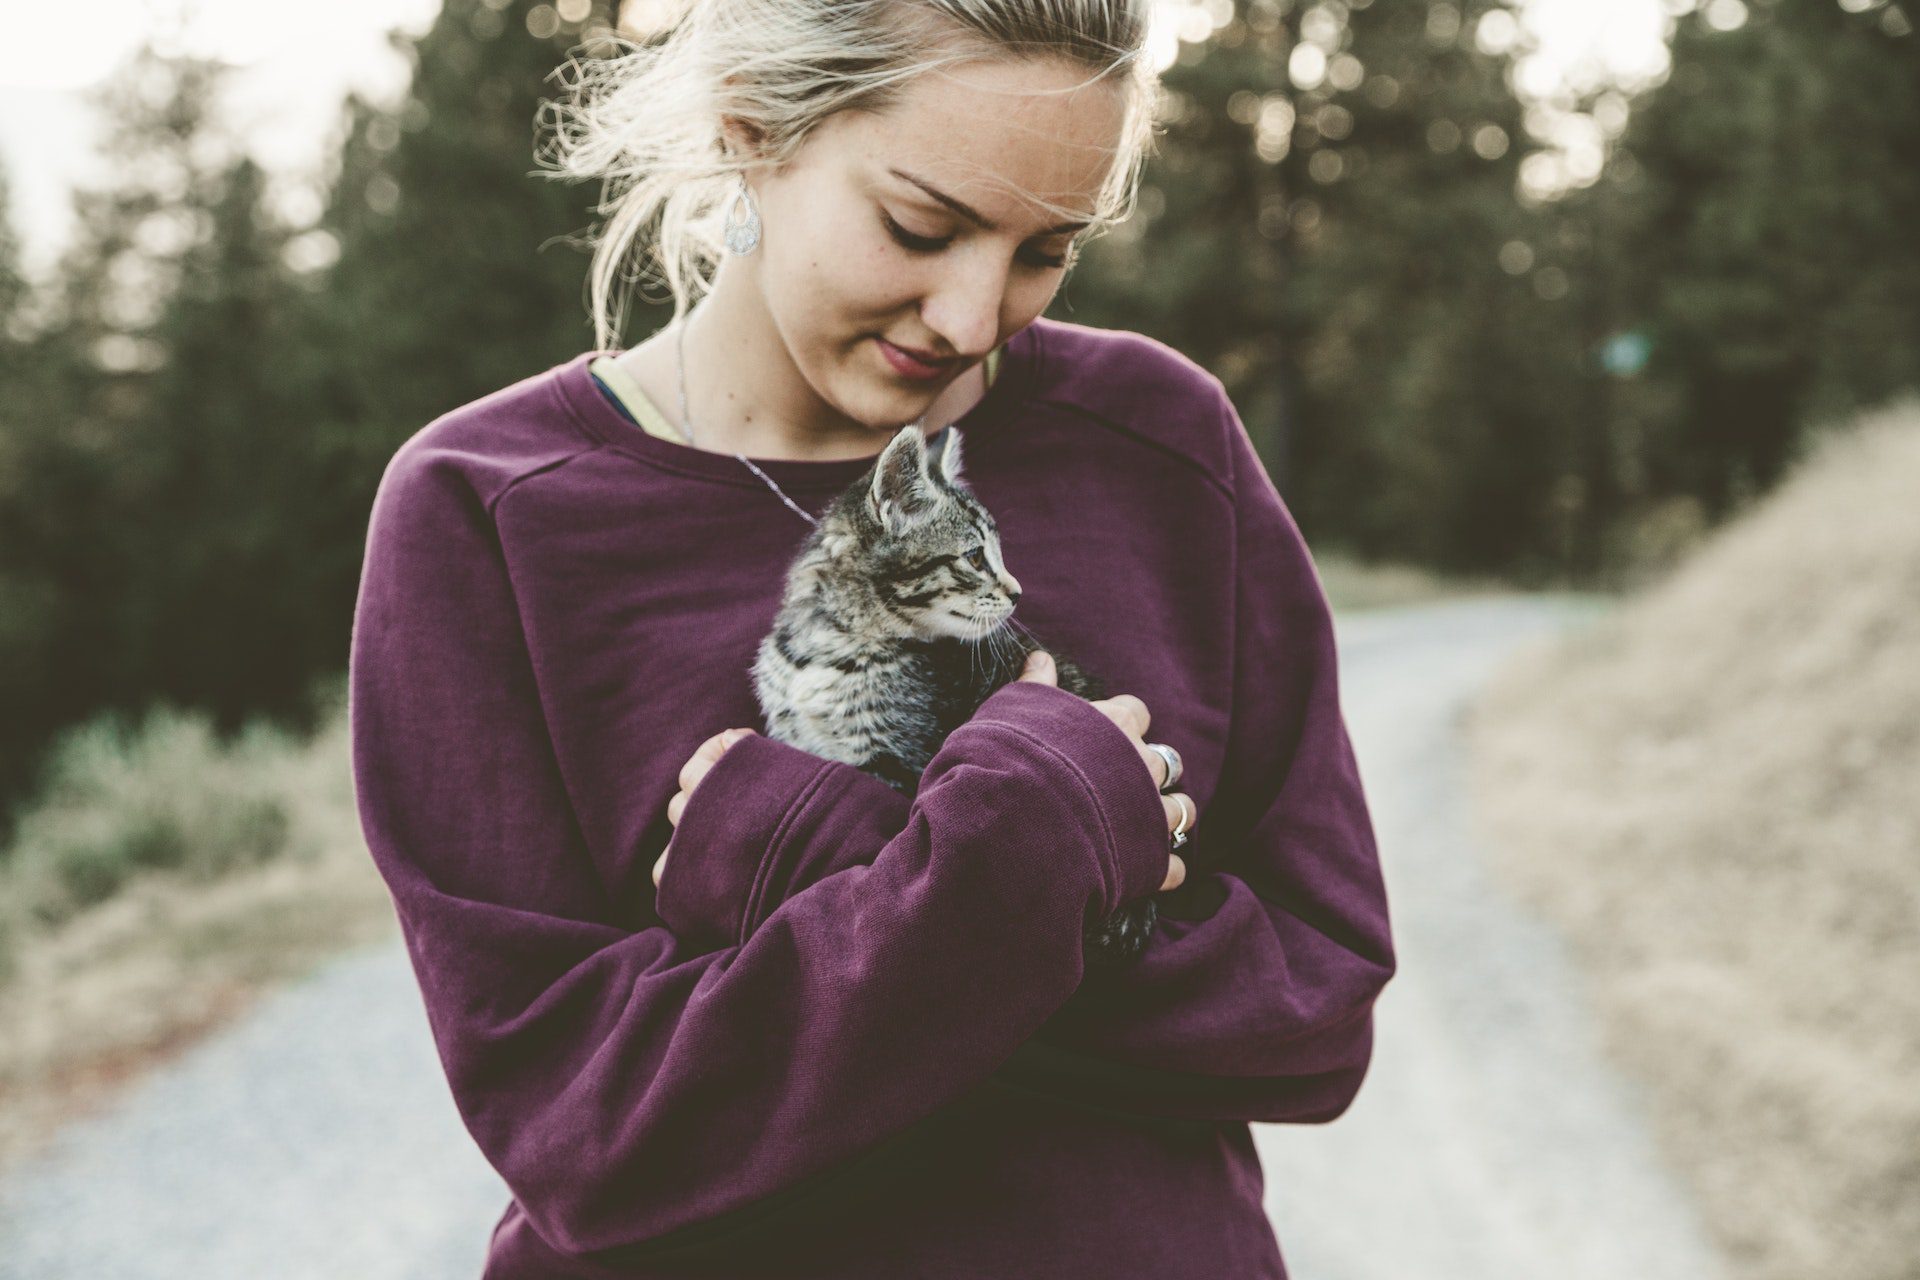 A young woman holding a cat